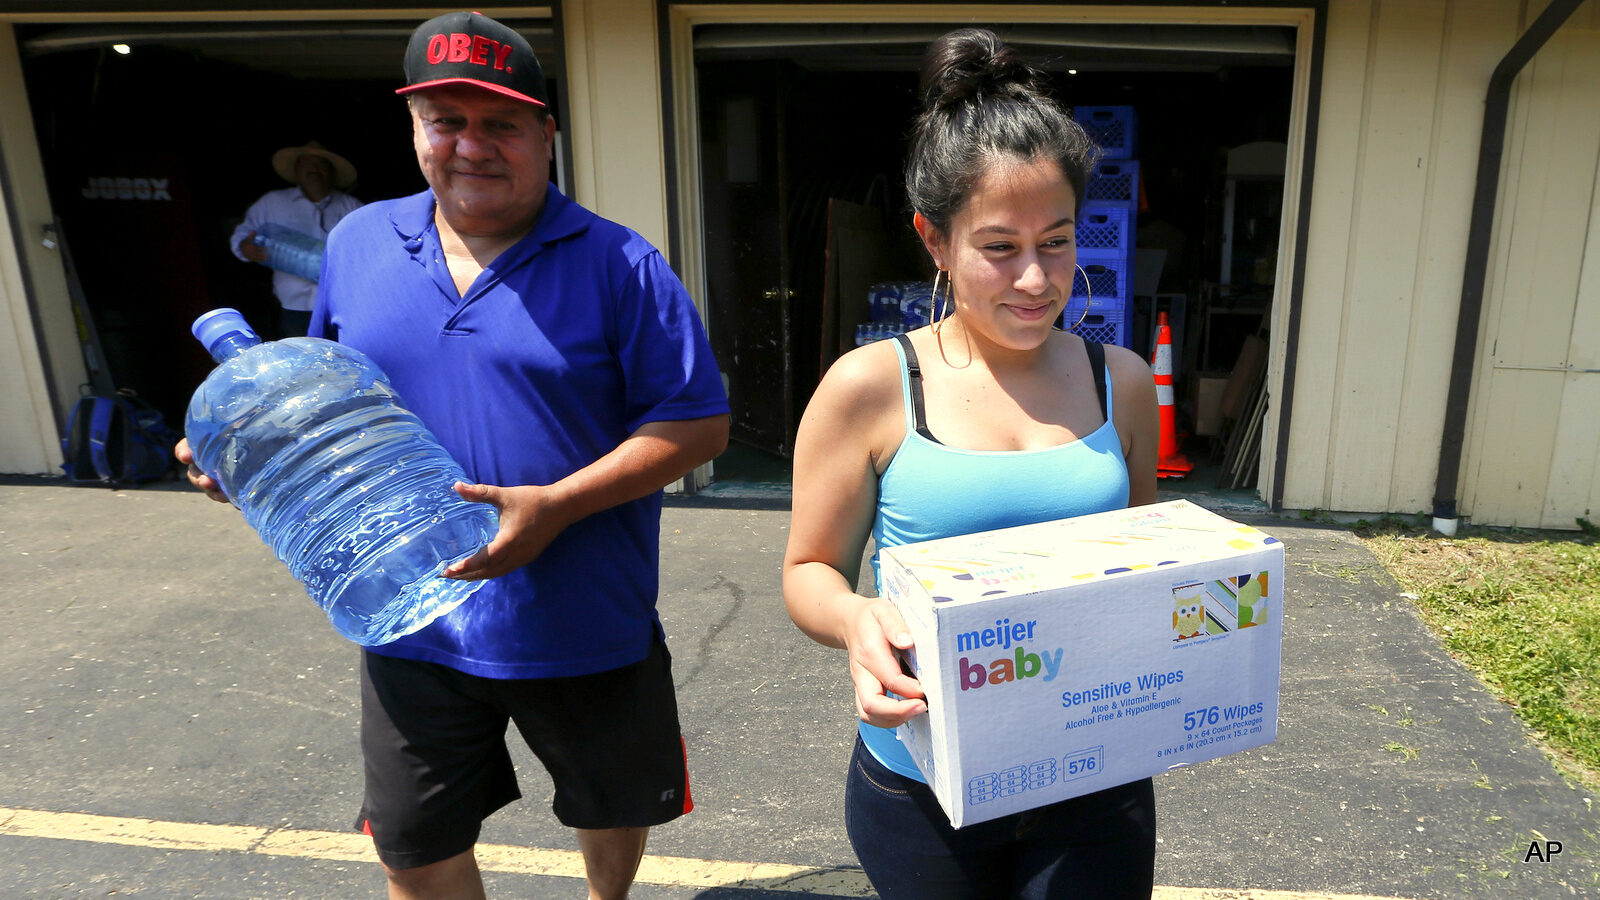 Margarita Solis, carries wipes as Rick Vasquez carries bottled water at Out Lady of Guadalupe Church in Flint, Mich. Solis regularly drives to Flint distribution centers to load up on bottled water, as thousands of residents have done in the city coping with a contaminated water crisis.